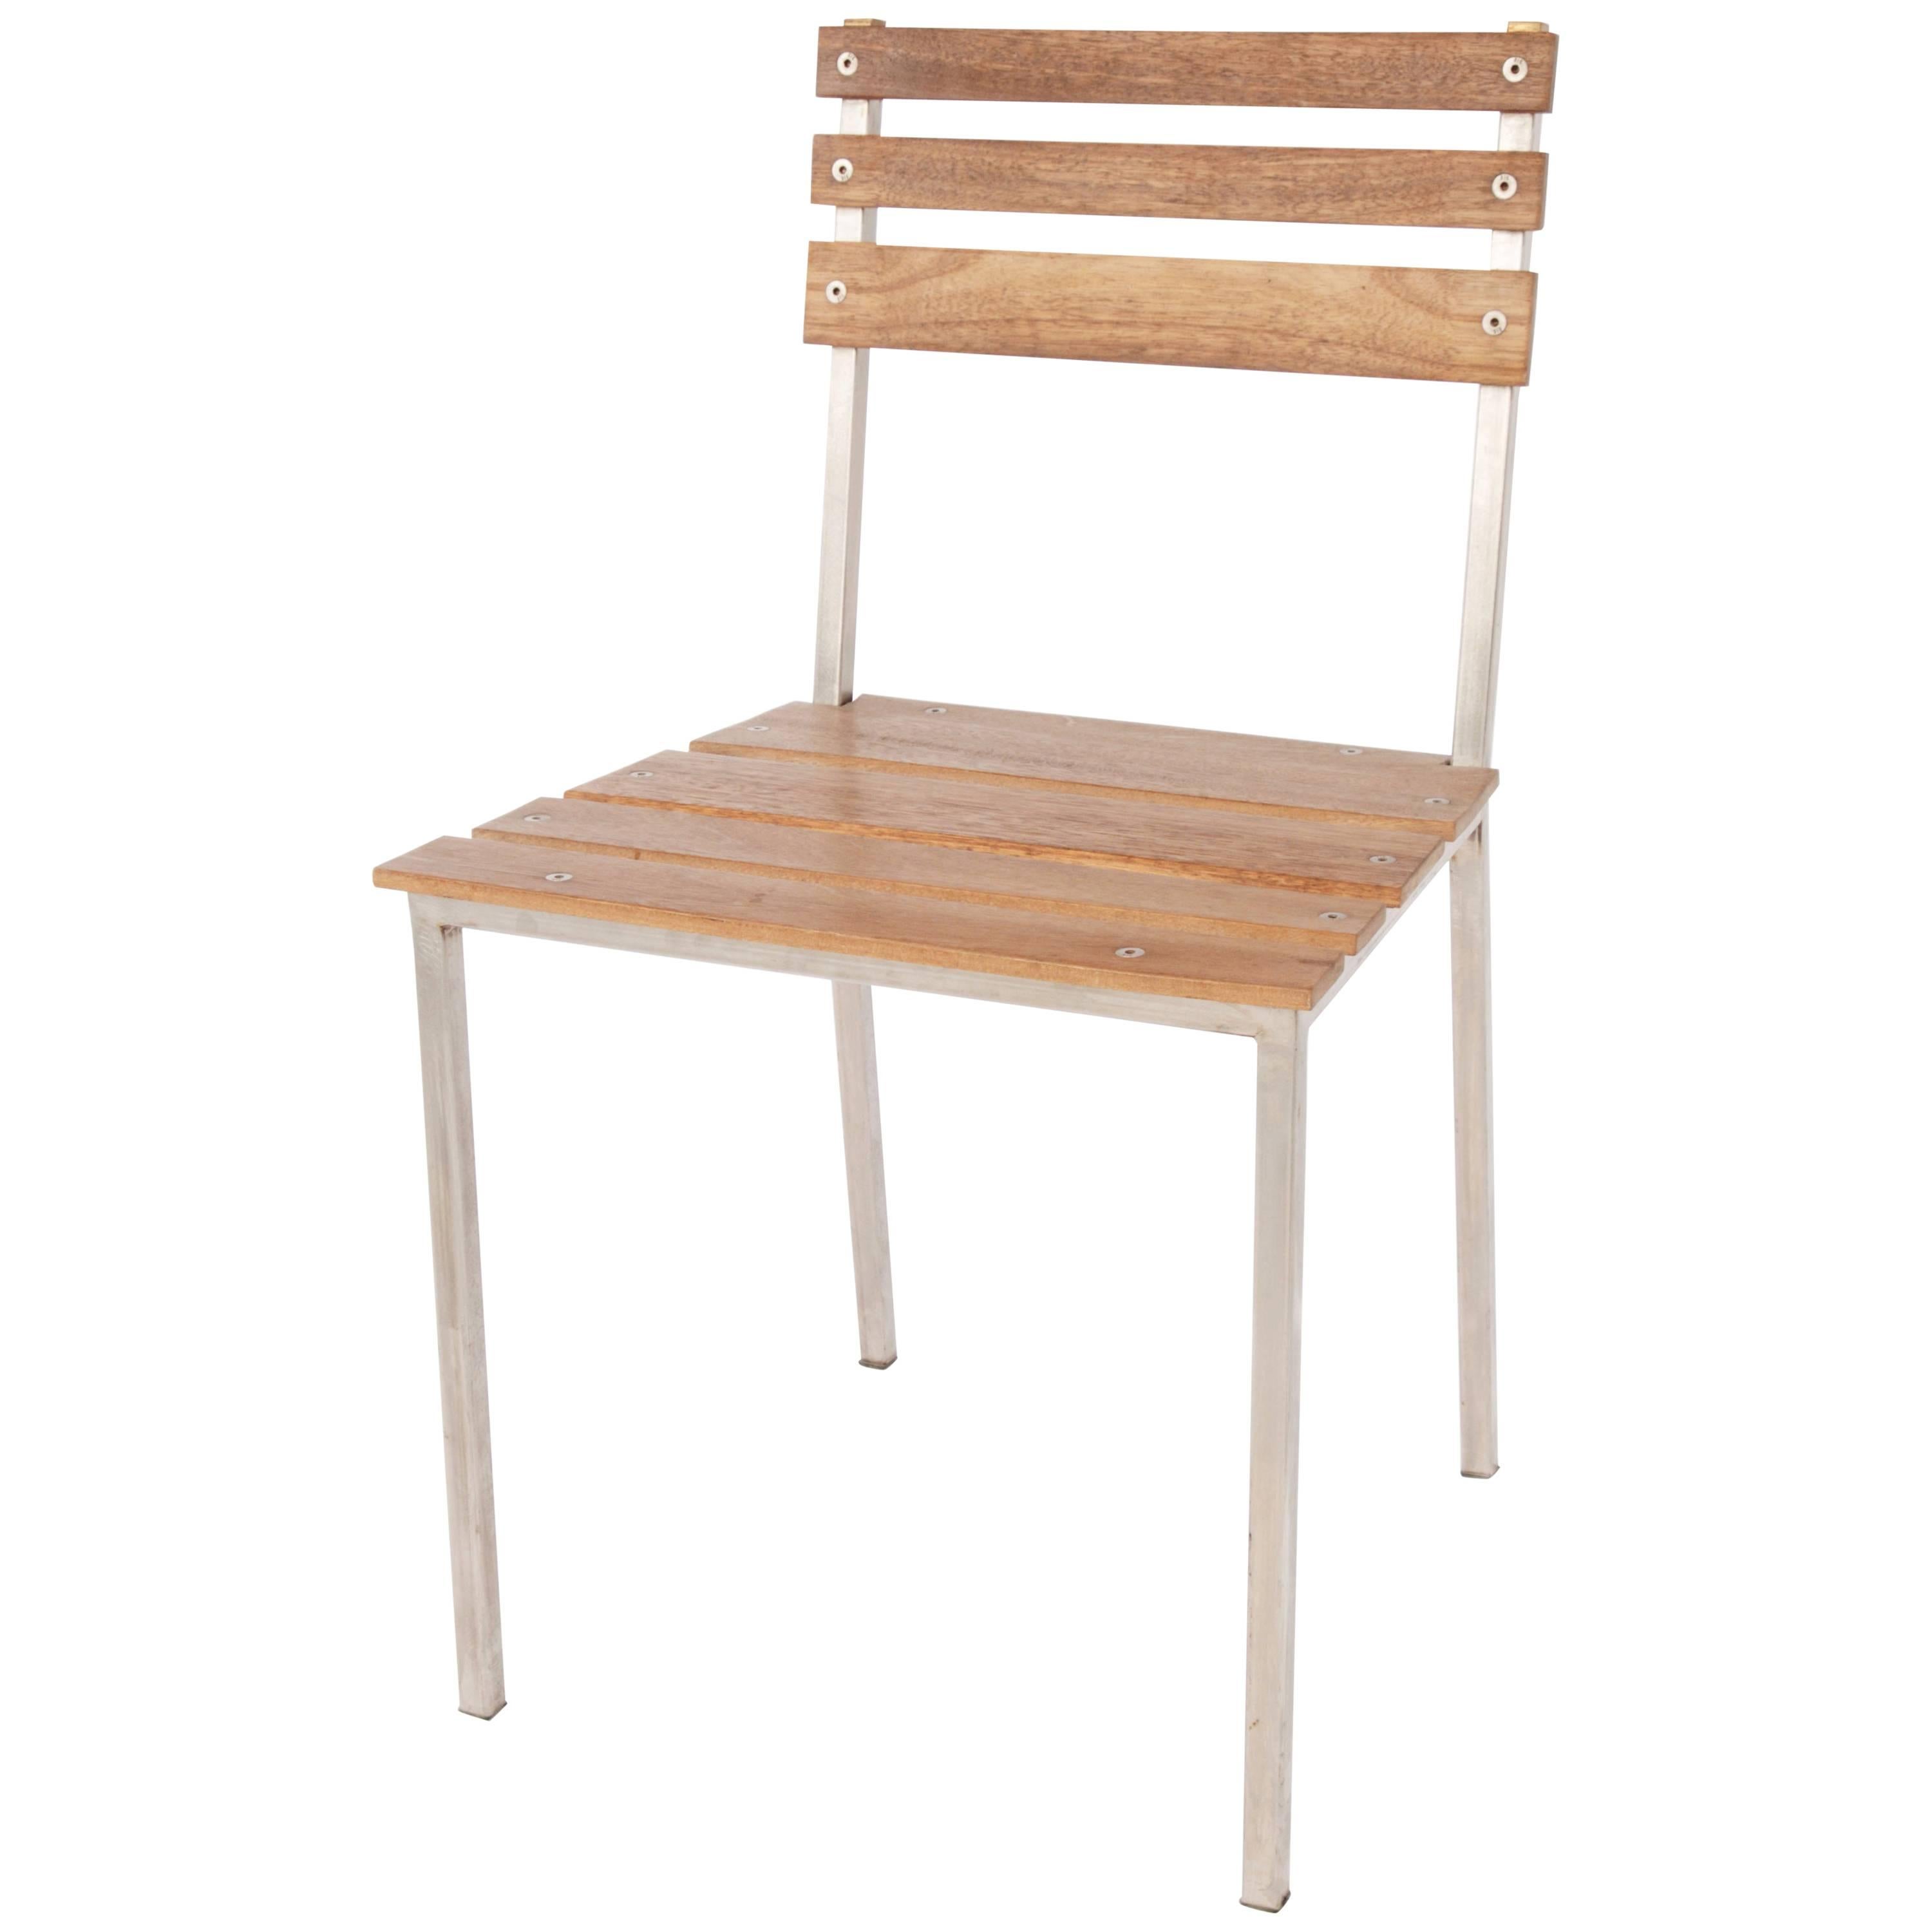 James de Wulf Heirloom Patio Dining Chair, Stainless Steel and Ipe Ironwood